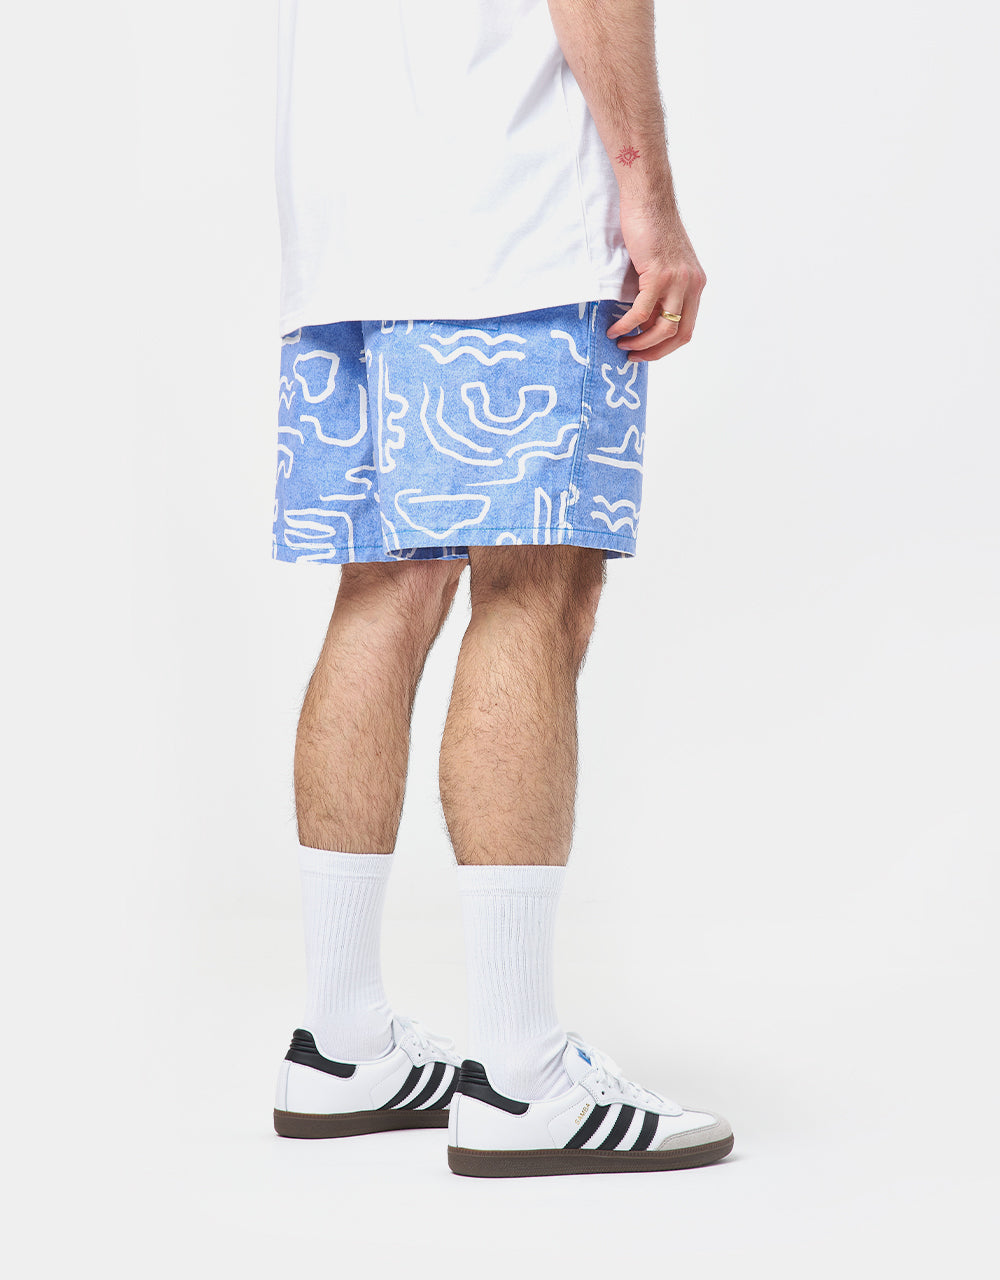 Patagonia Funhoggers Short - Channel Islands: Vessel Blue